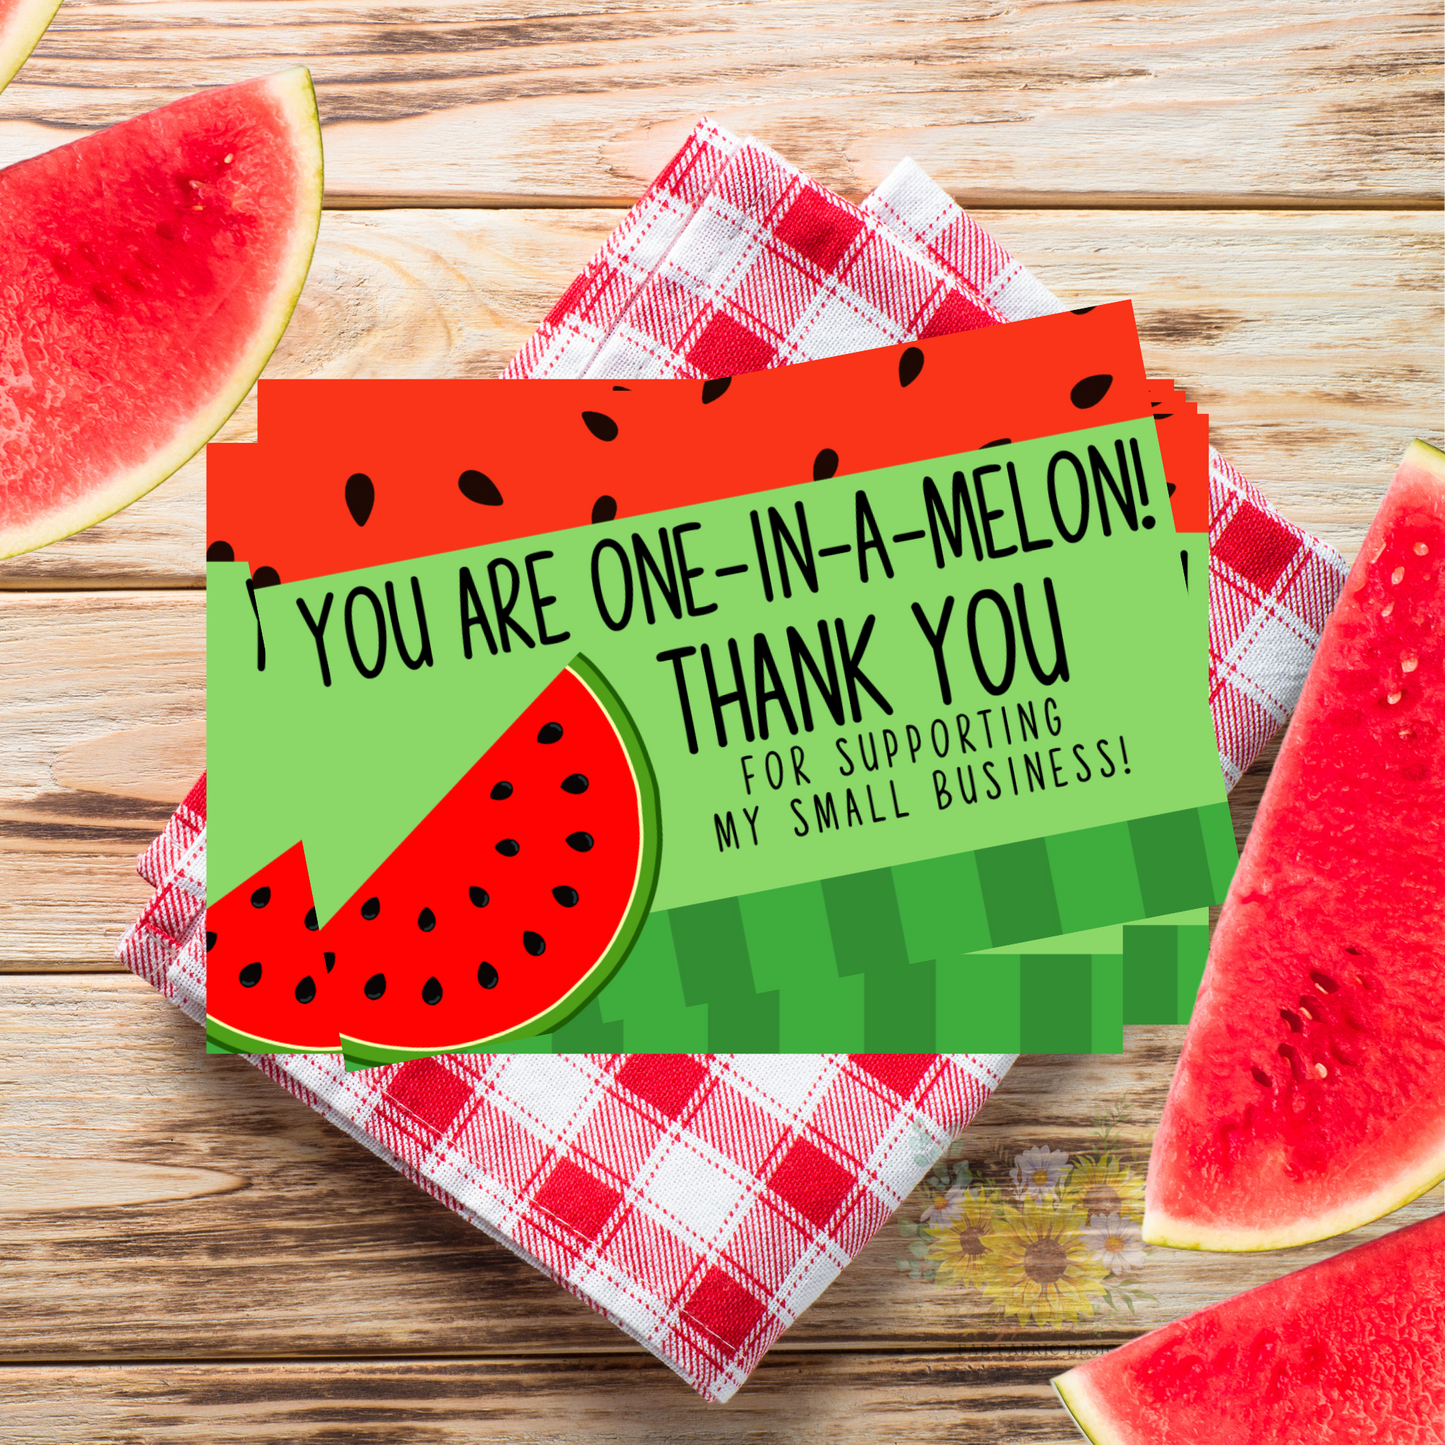 You Are One-In-A-Melon, Thank You for Supporting My Small Business Cards